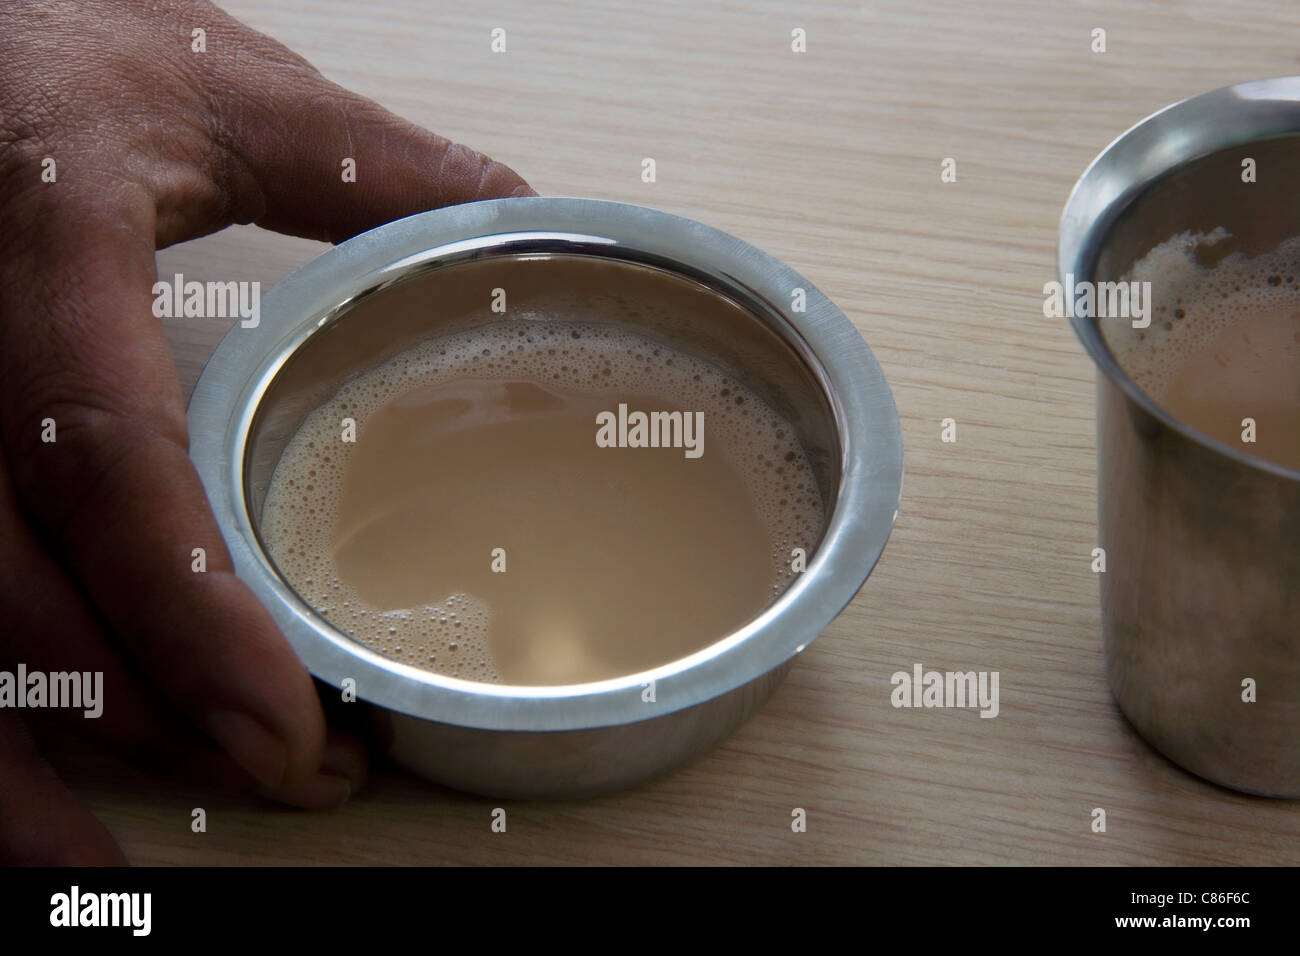 Filter coffee in a tumbler and dabarah Stock Photo